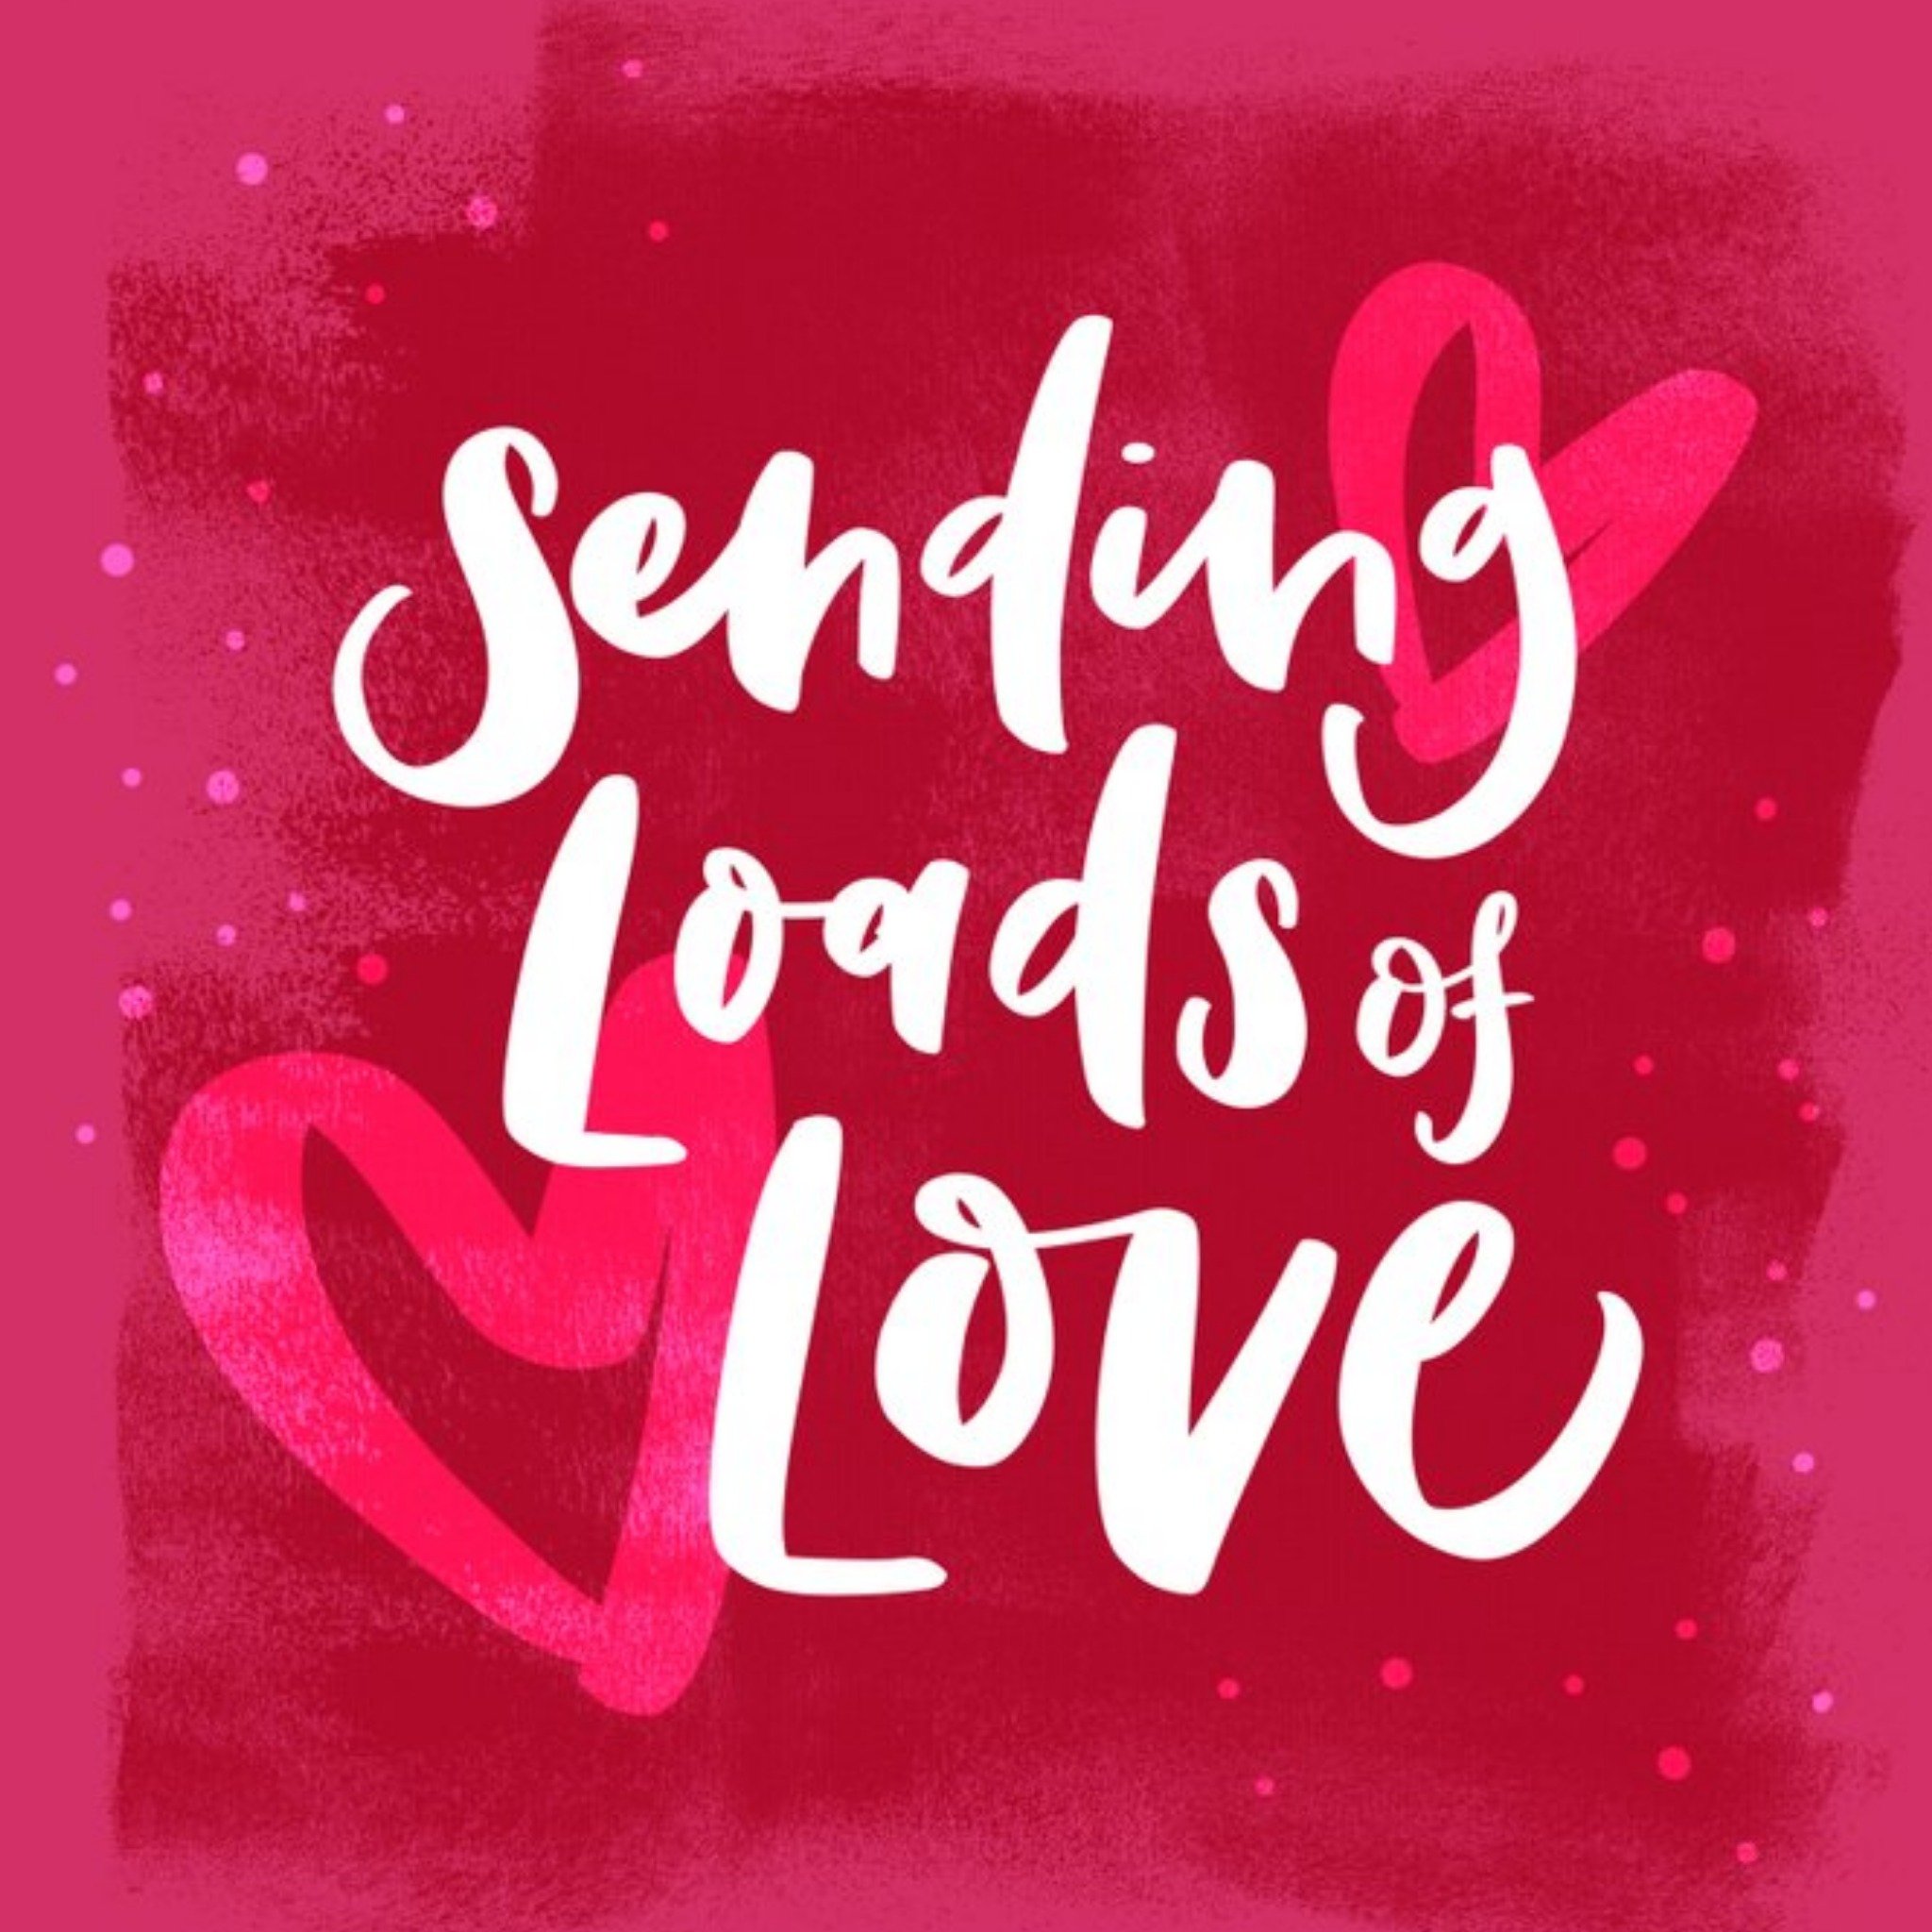 Moonpig Sending Loads Of Love - Thinking Of You Card - Typographic, Large